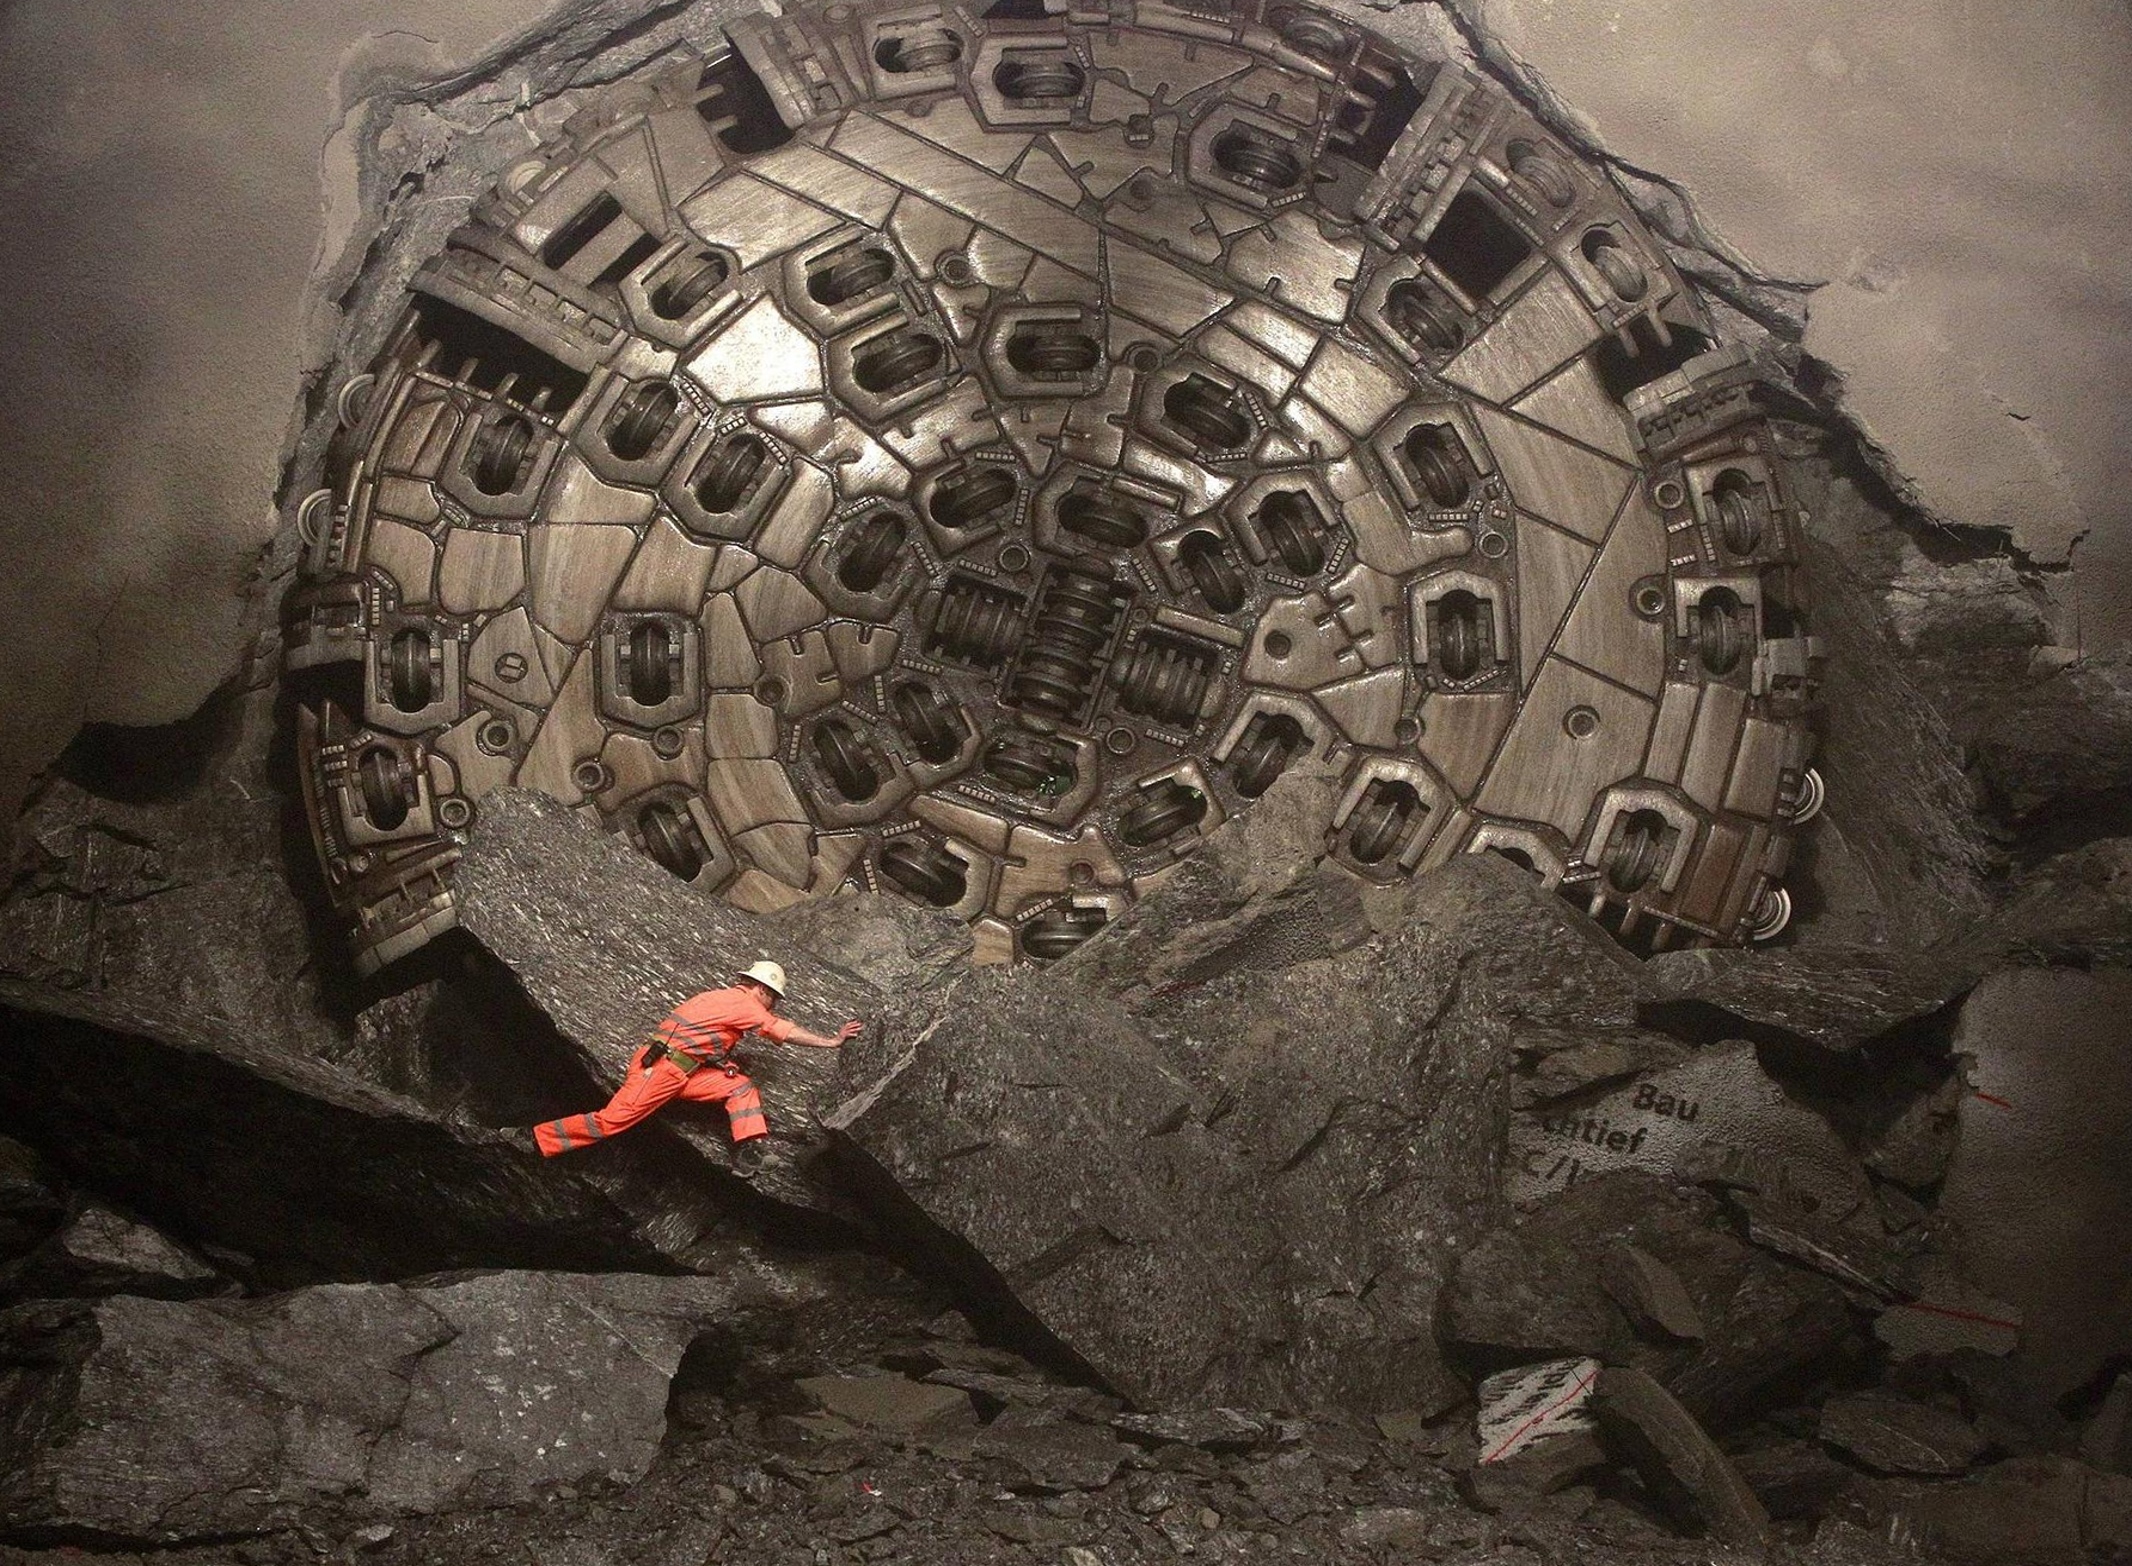 4,500 horsepower boring machine breaking through at the end of Gotthard Base Tunnel